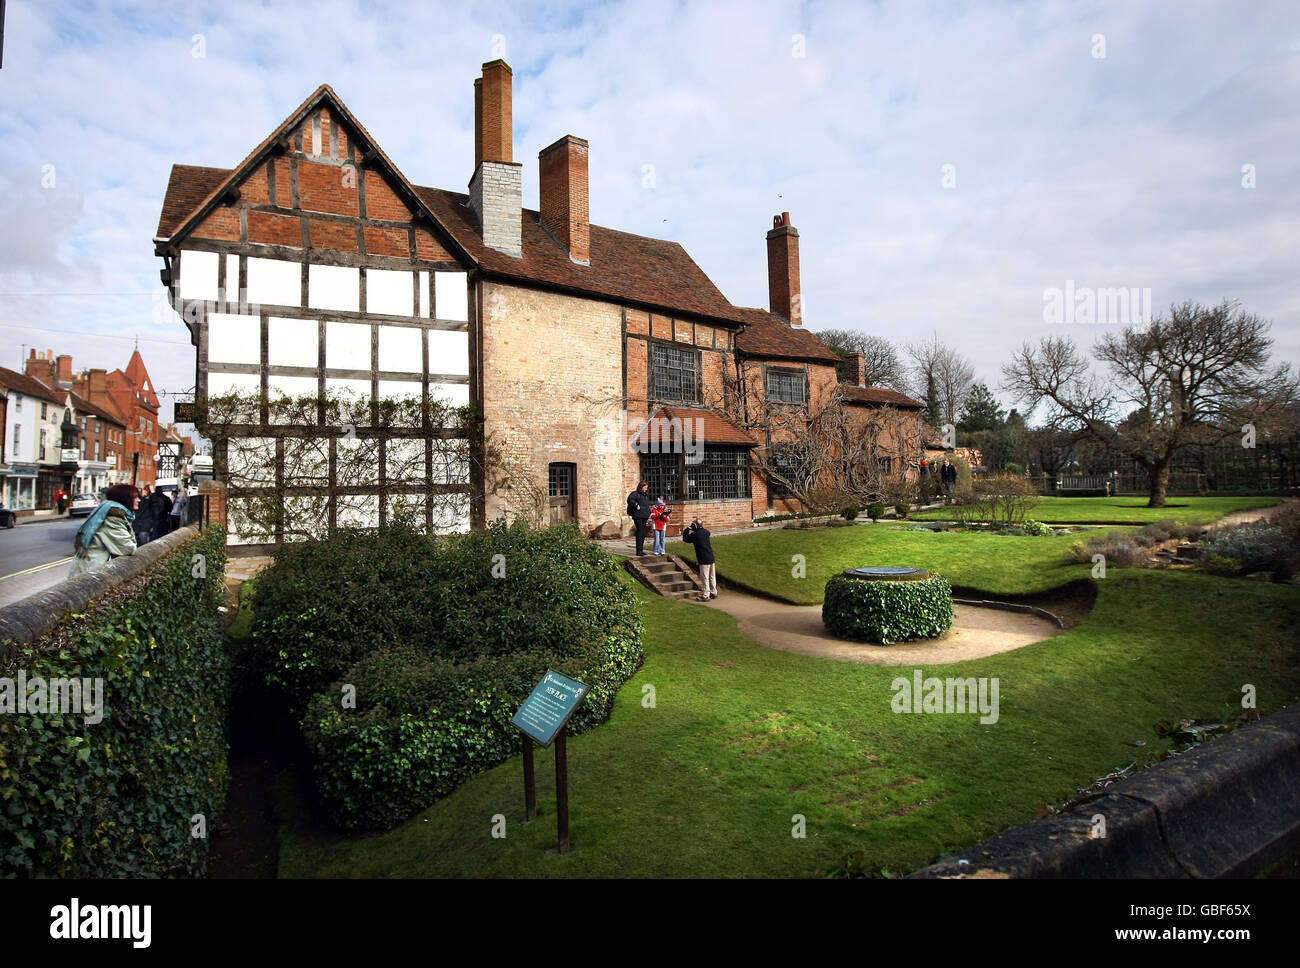 Nash's House and the site of New Place, William Shakespeare's final home and the place where he died in 1616 in Stratford-upon-Avon. Stock Photo